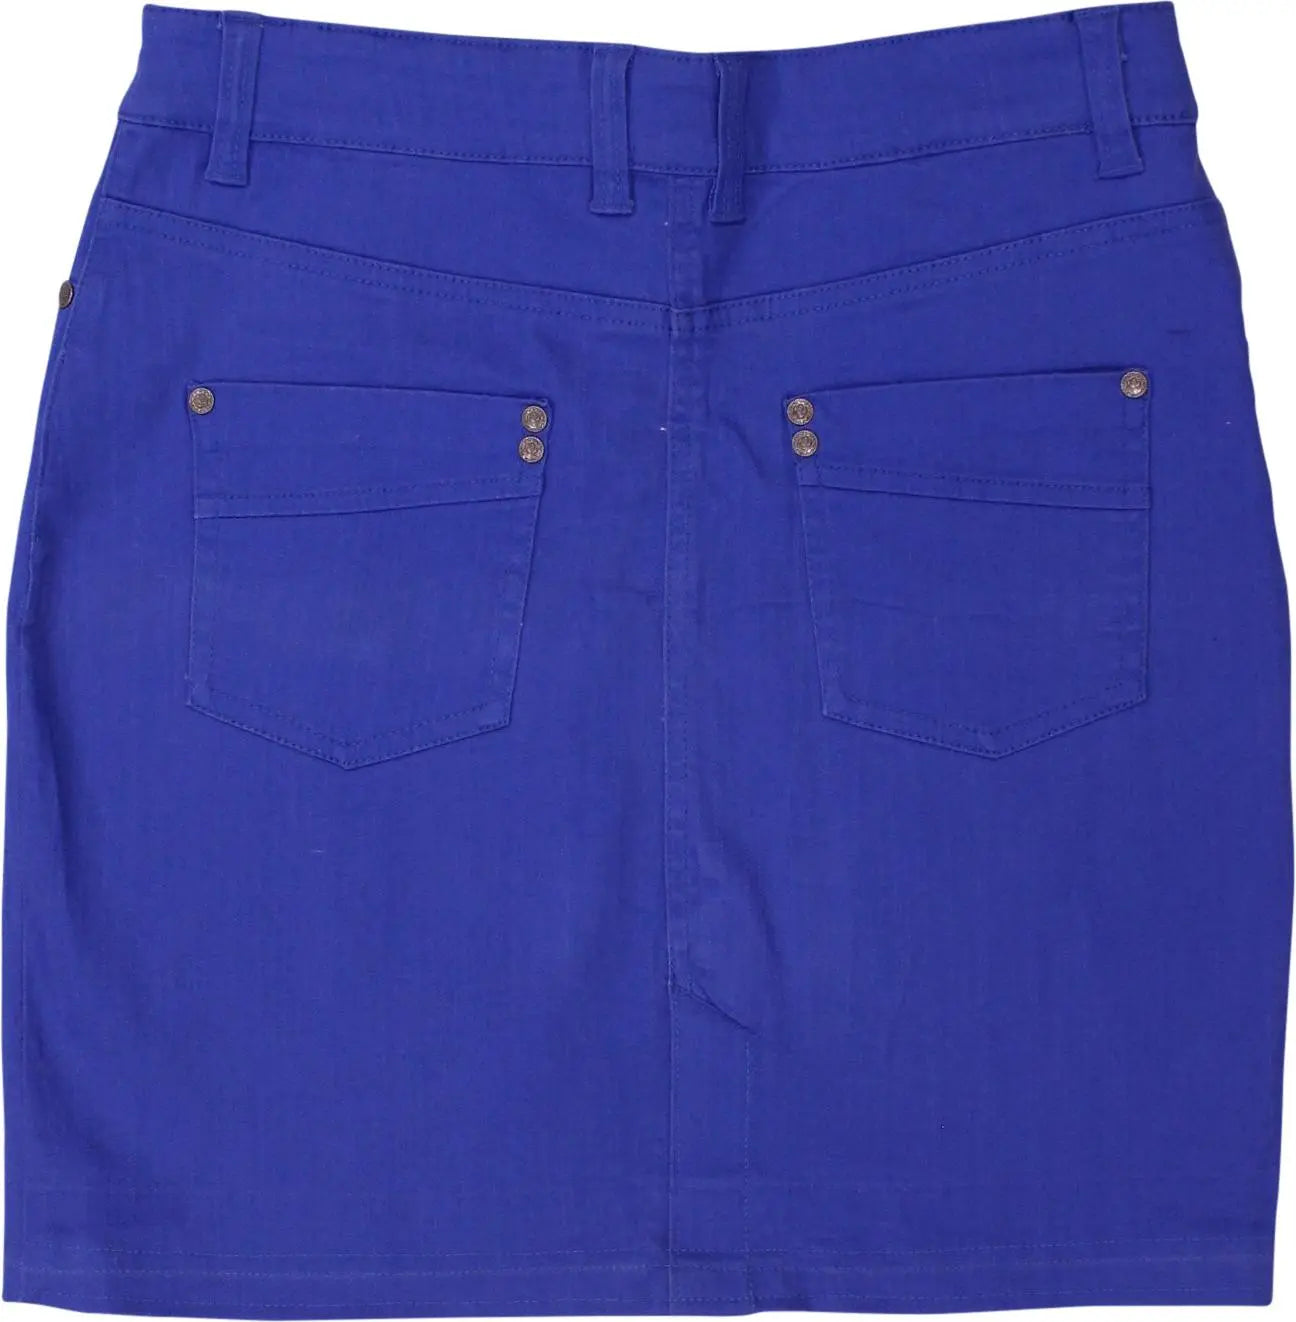 Unknown - Blue Short Skirt- ThriftTale.com - Vintage and second handclothing